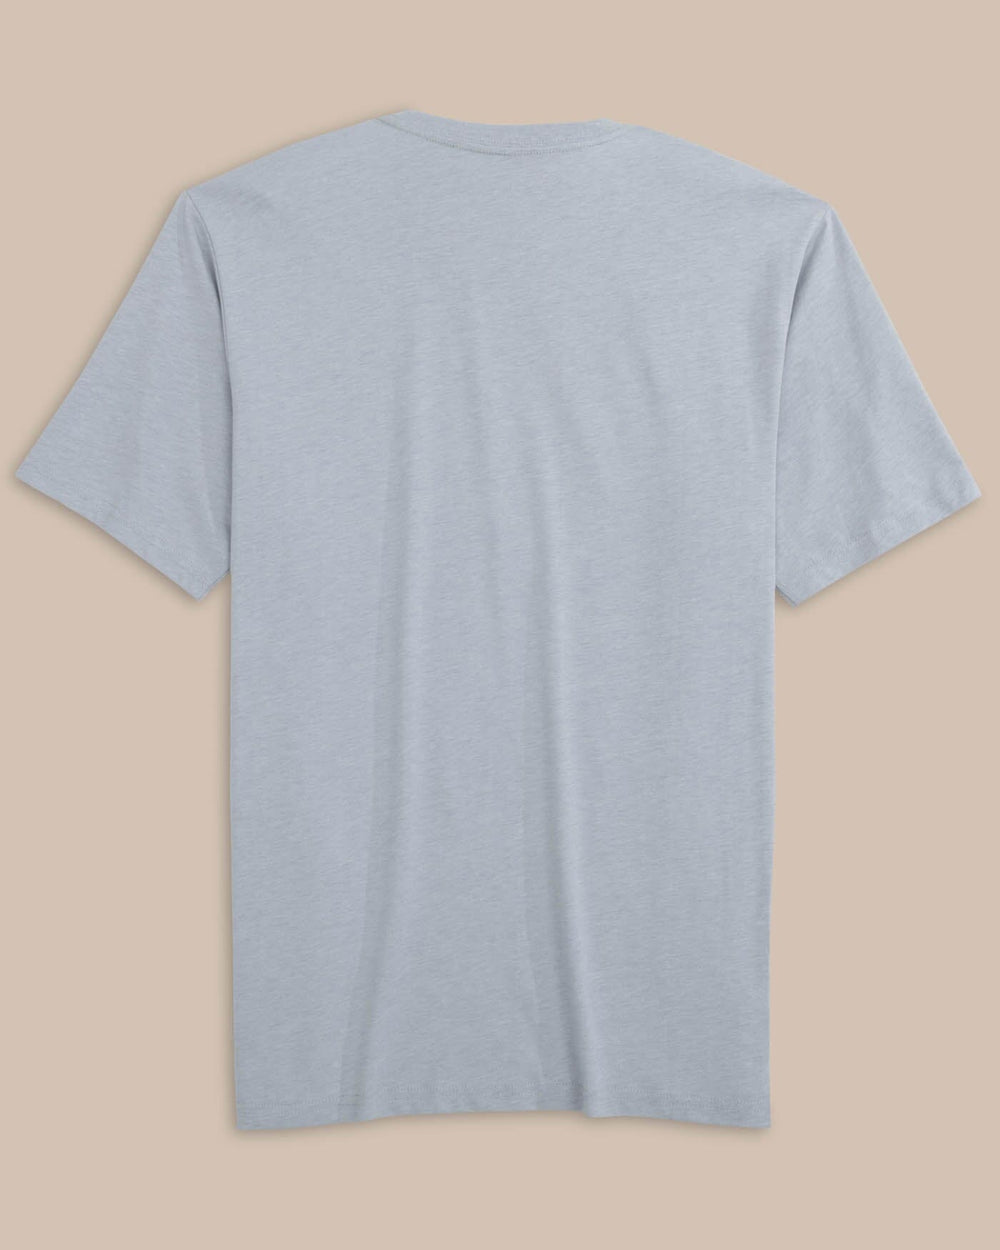 The back view of the Southern Tide Heather Reel Fly Premium Apparel Short Sleeve T-Shirt by Southern Tide - Heather Platinum Grey